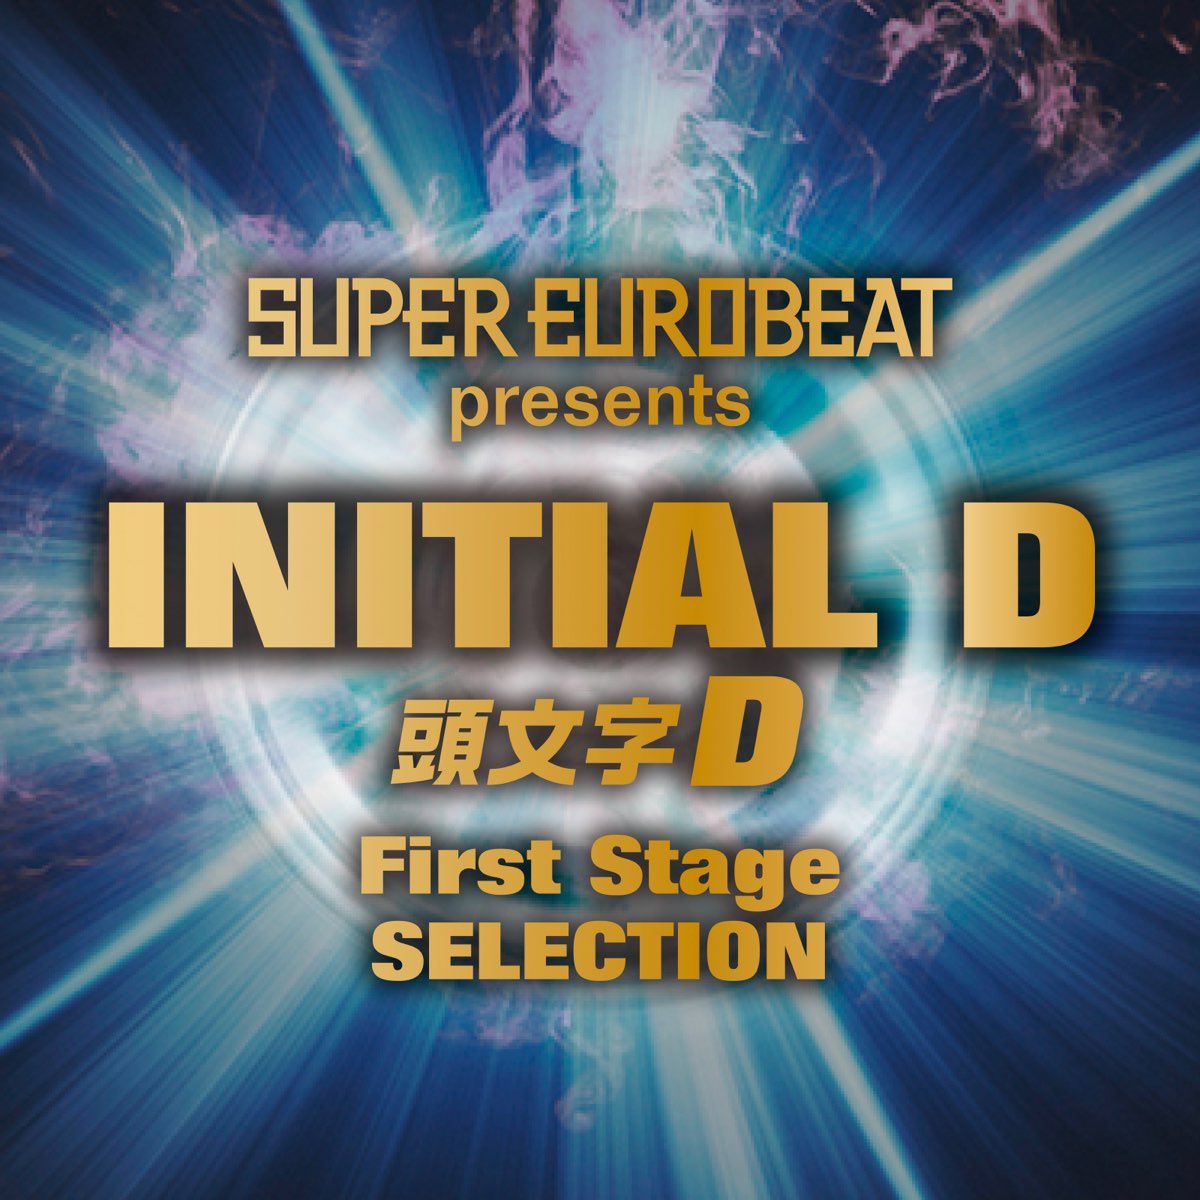 Super Eurobeat Presents Initial D First Stage Selection By Various Artists On Apple Music